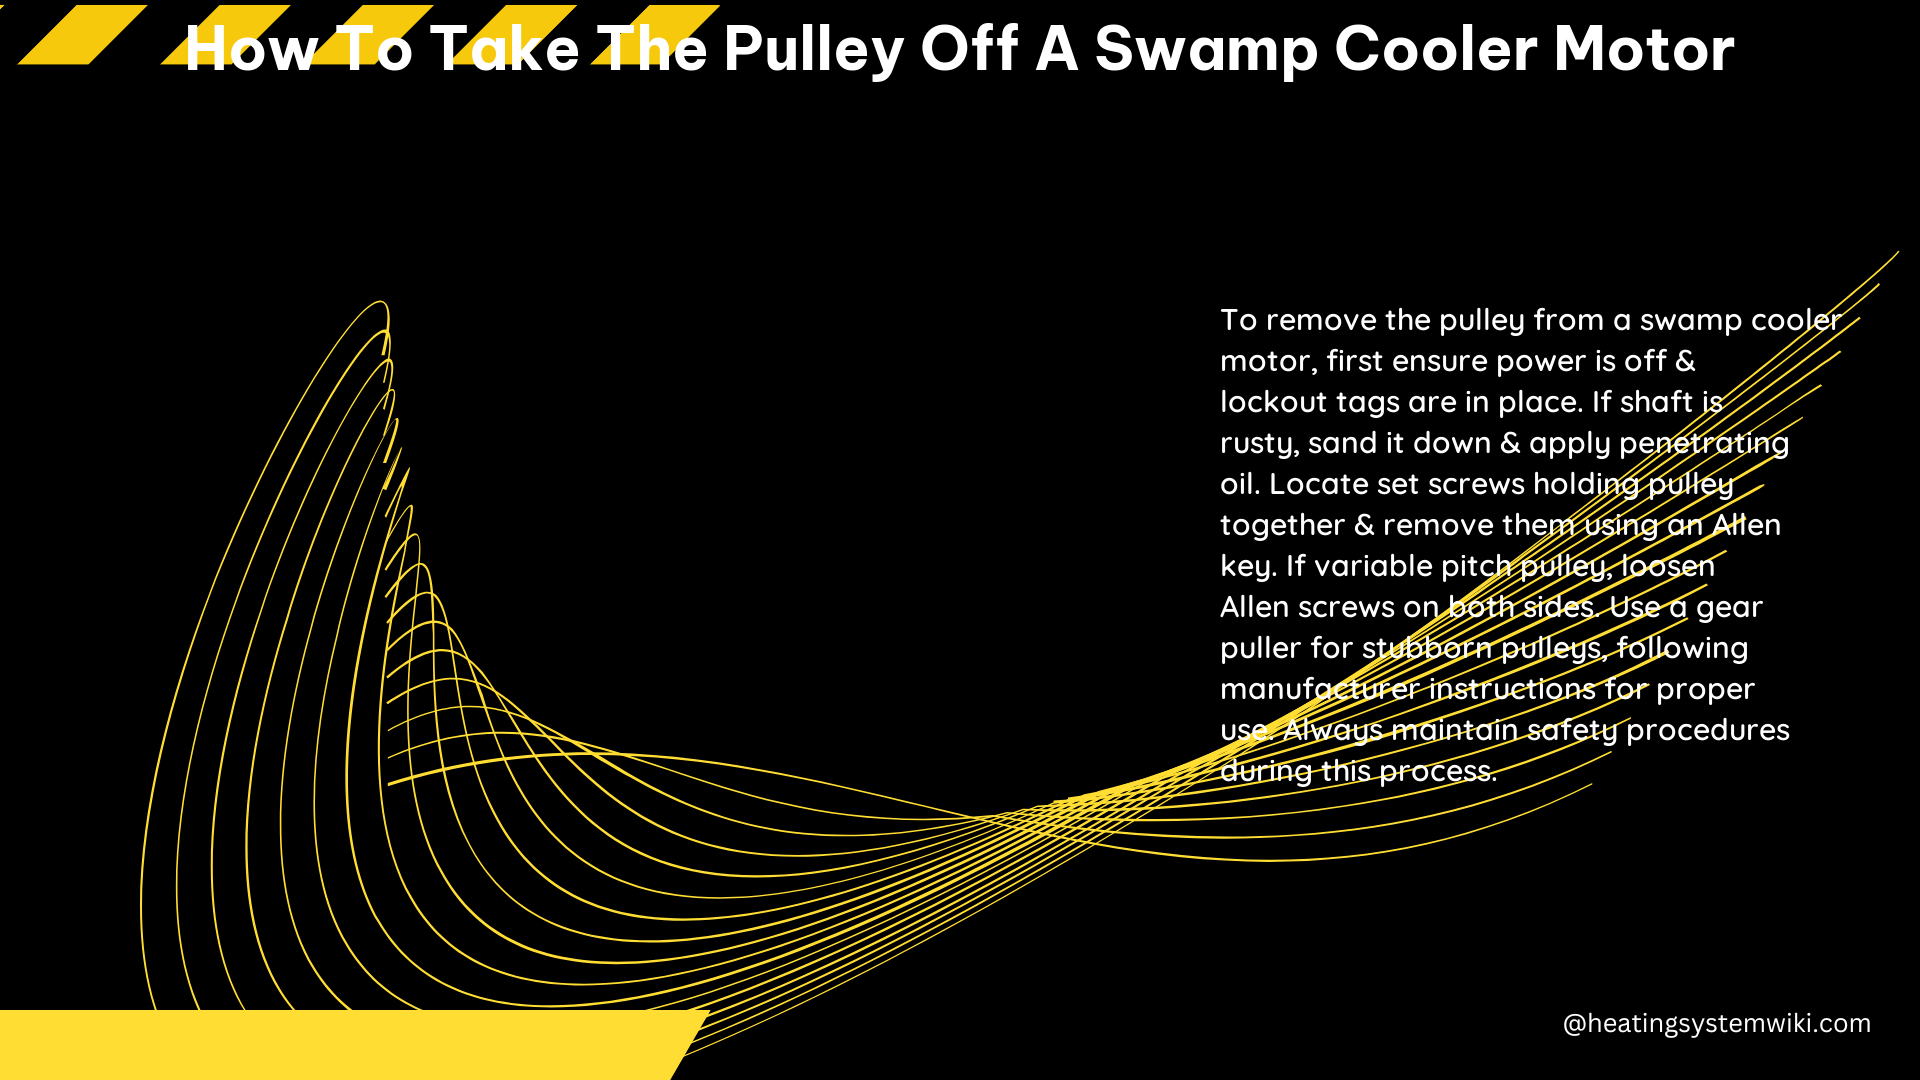 How to Take the Pulley off a Swamp Cooler Motor